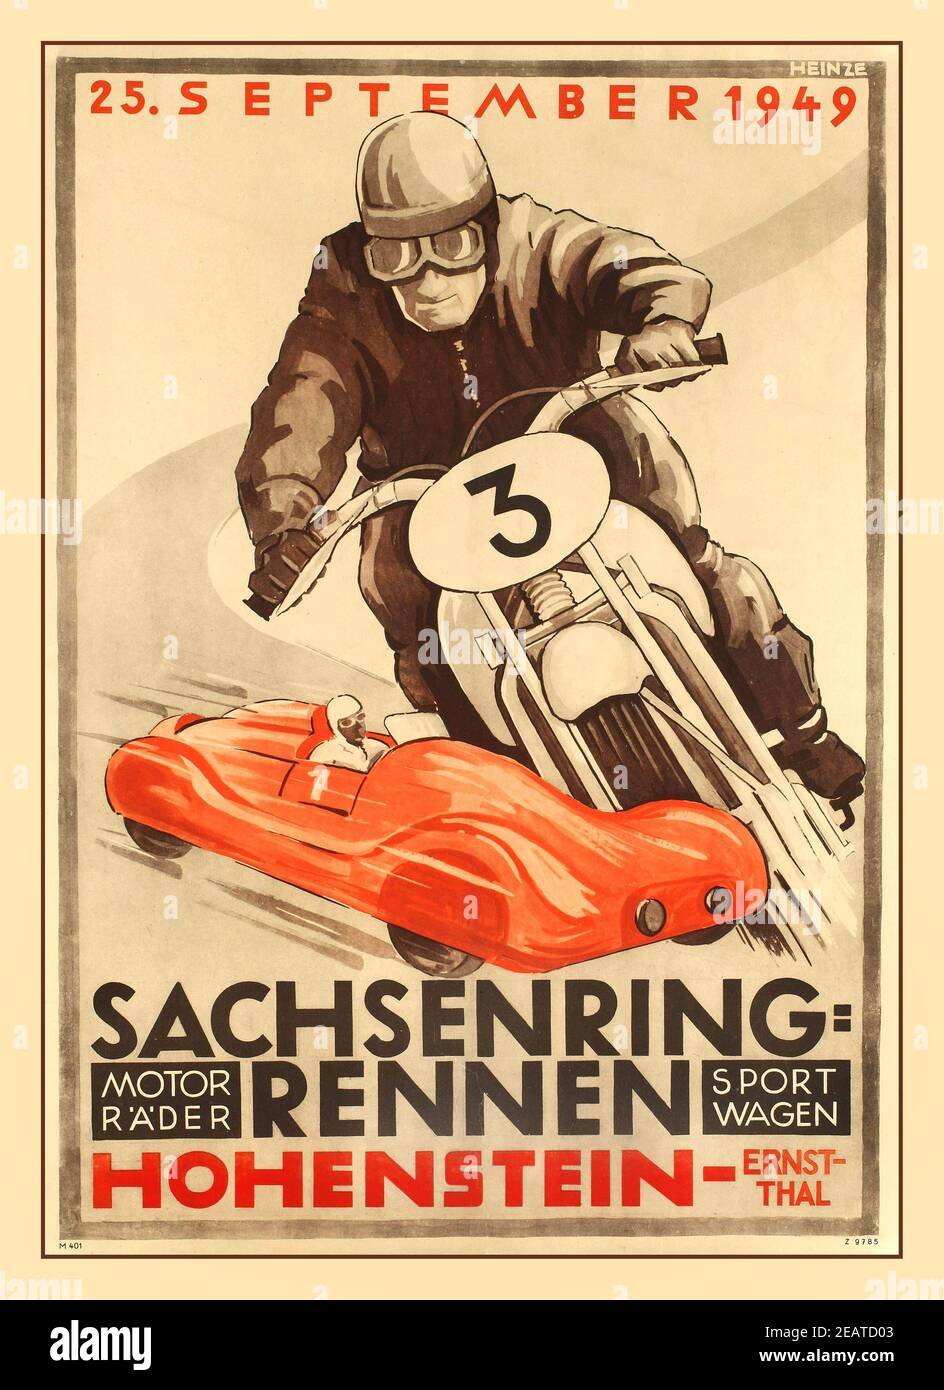 Vintage Motorcycle Racing Poster sports event 1940’s The Sachsenring motorsport racing circuit located in Hohenstein-Ernstthal near Chemnitz in Saxony, Germany. It features the annual German motorcycle Grand Prix of the FIM Grand Prix motorcycle racing world championship. Sachsenring-rennen Hohenstein Ernstthal, original poster printed in Germany 1949 Artist Heinze Stock Photo